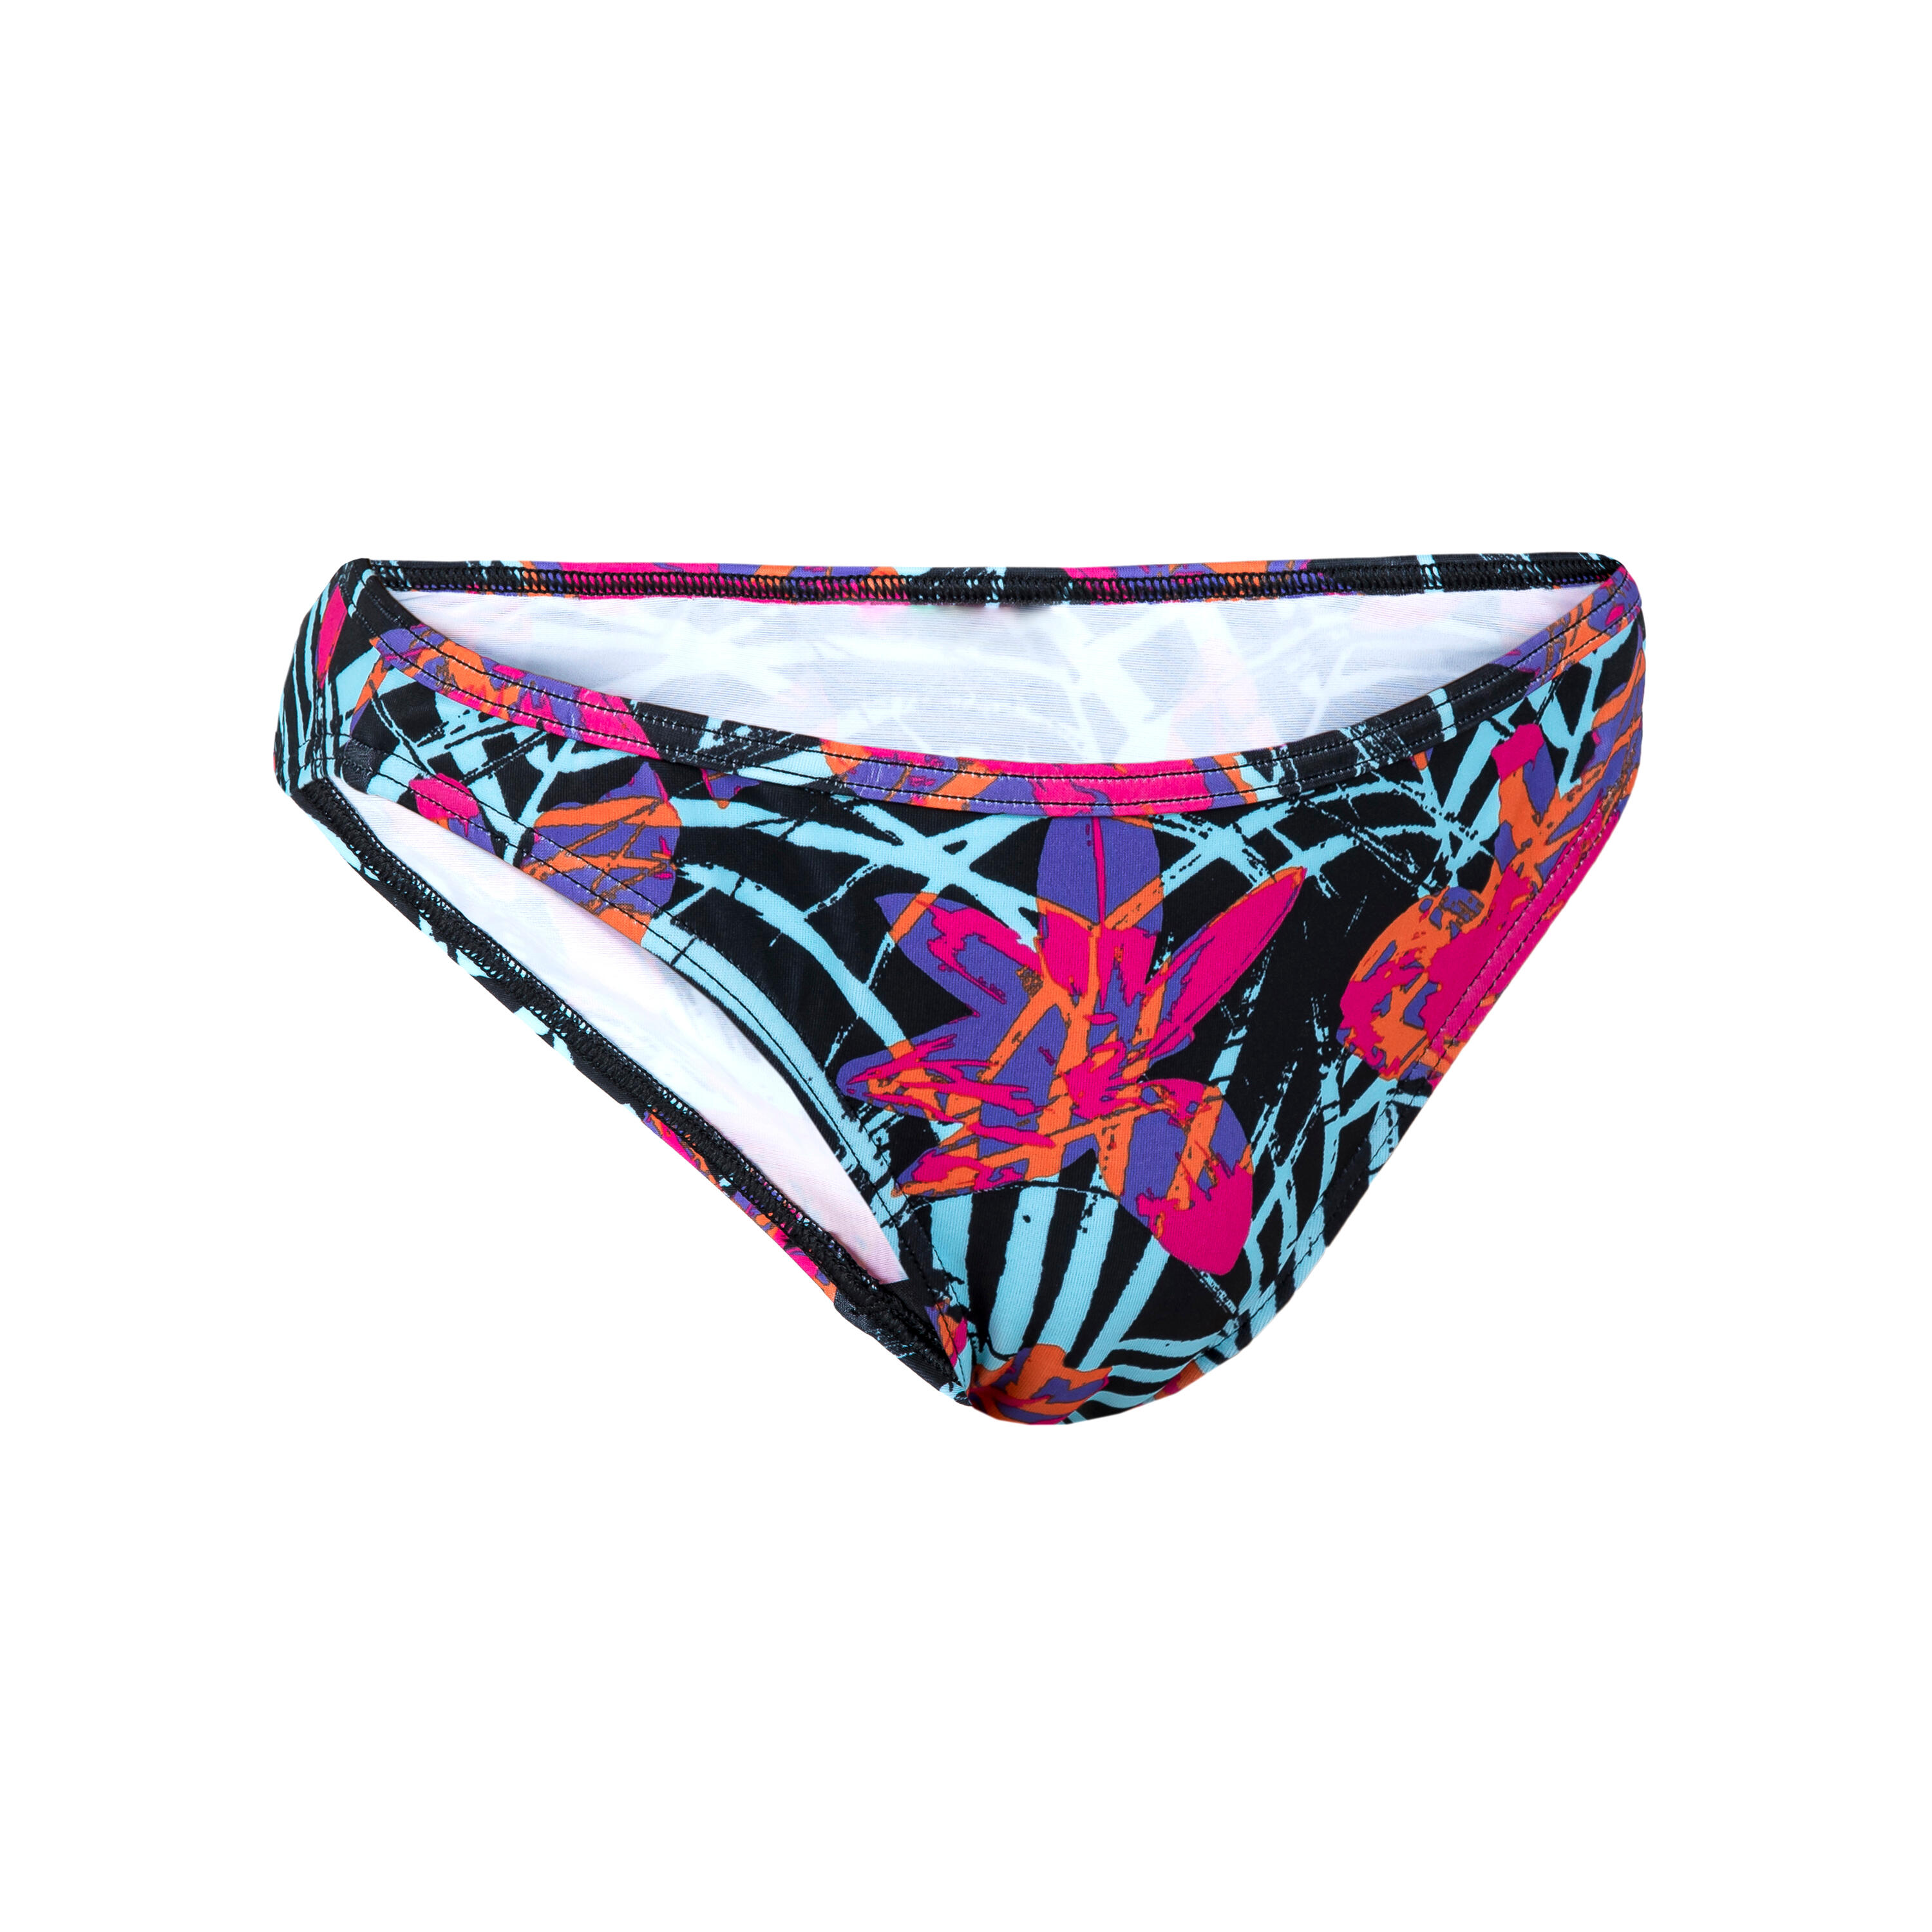 OLAIAN Girl's swimsuit bottoms - 100 Zeli tropical party pink